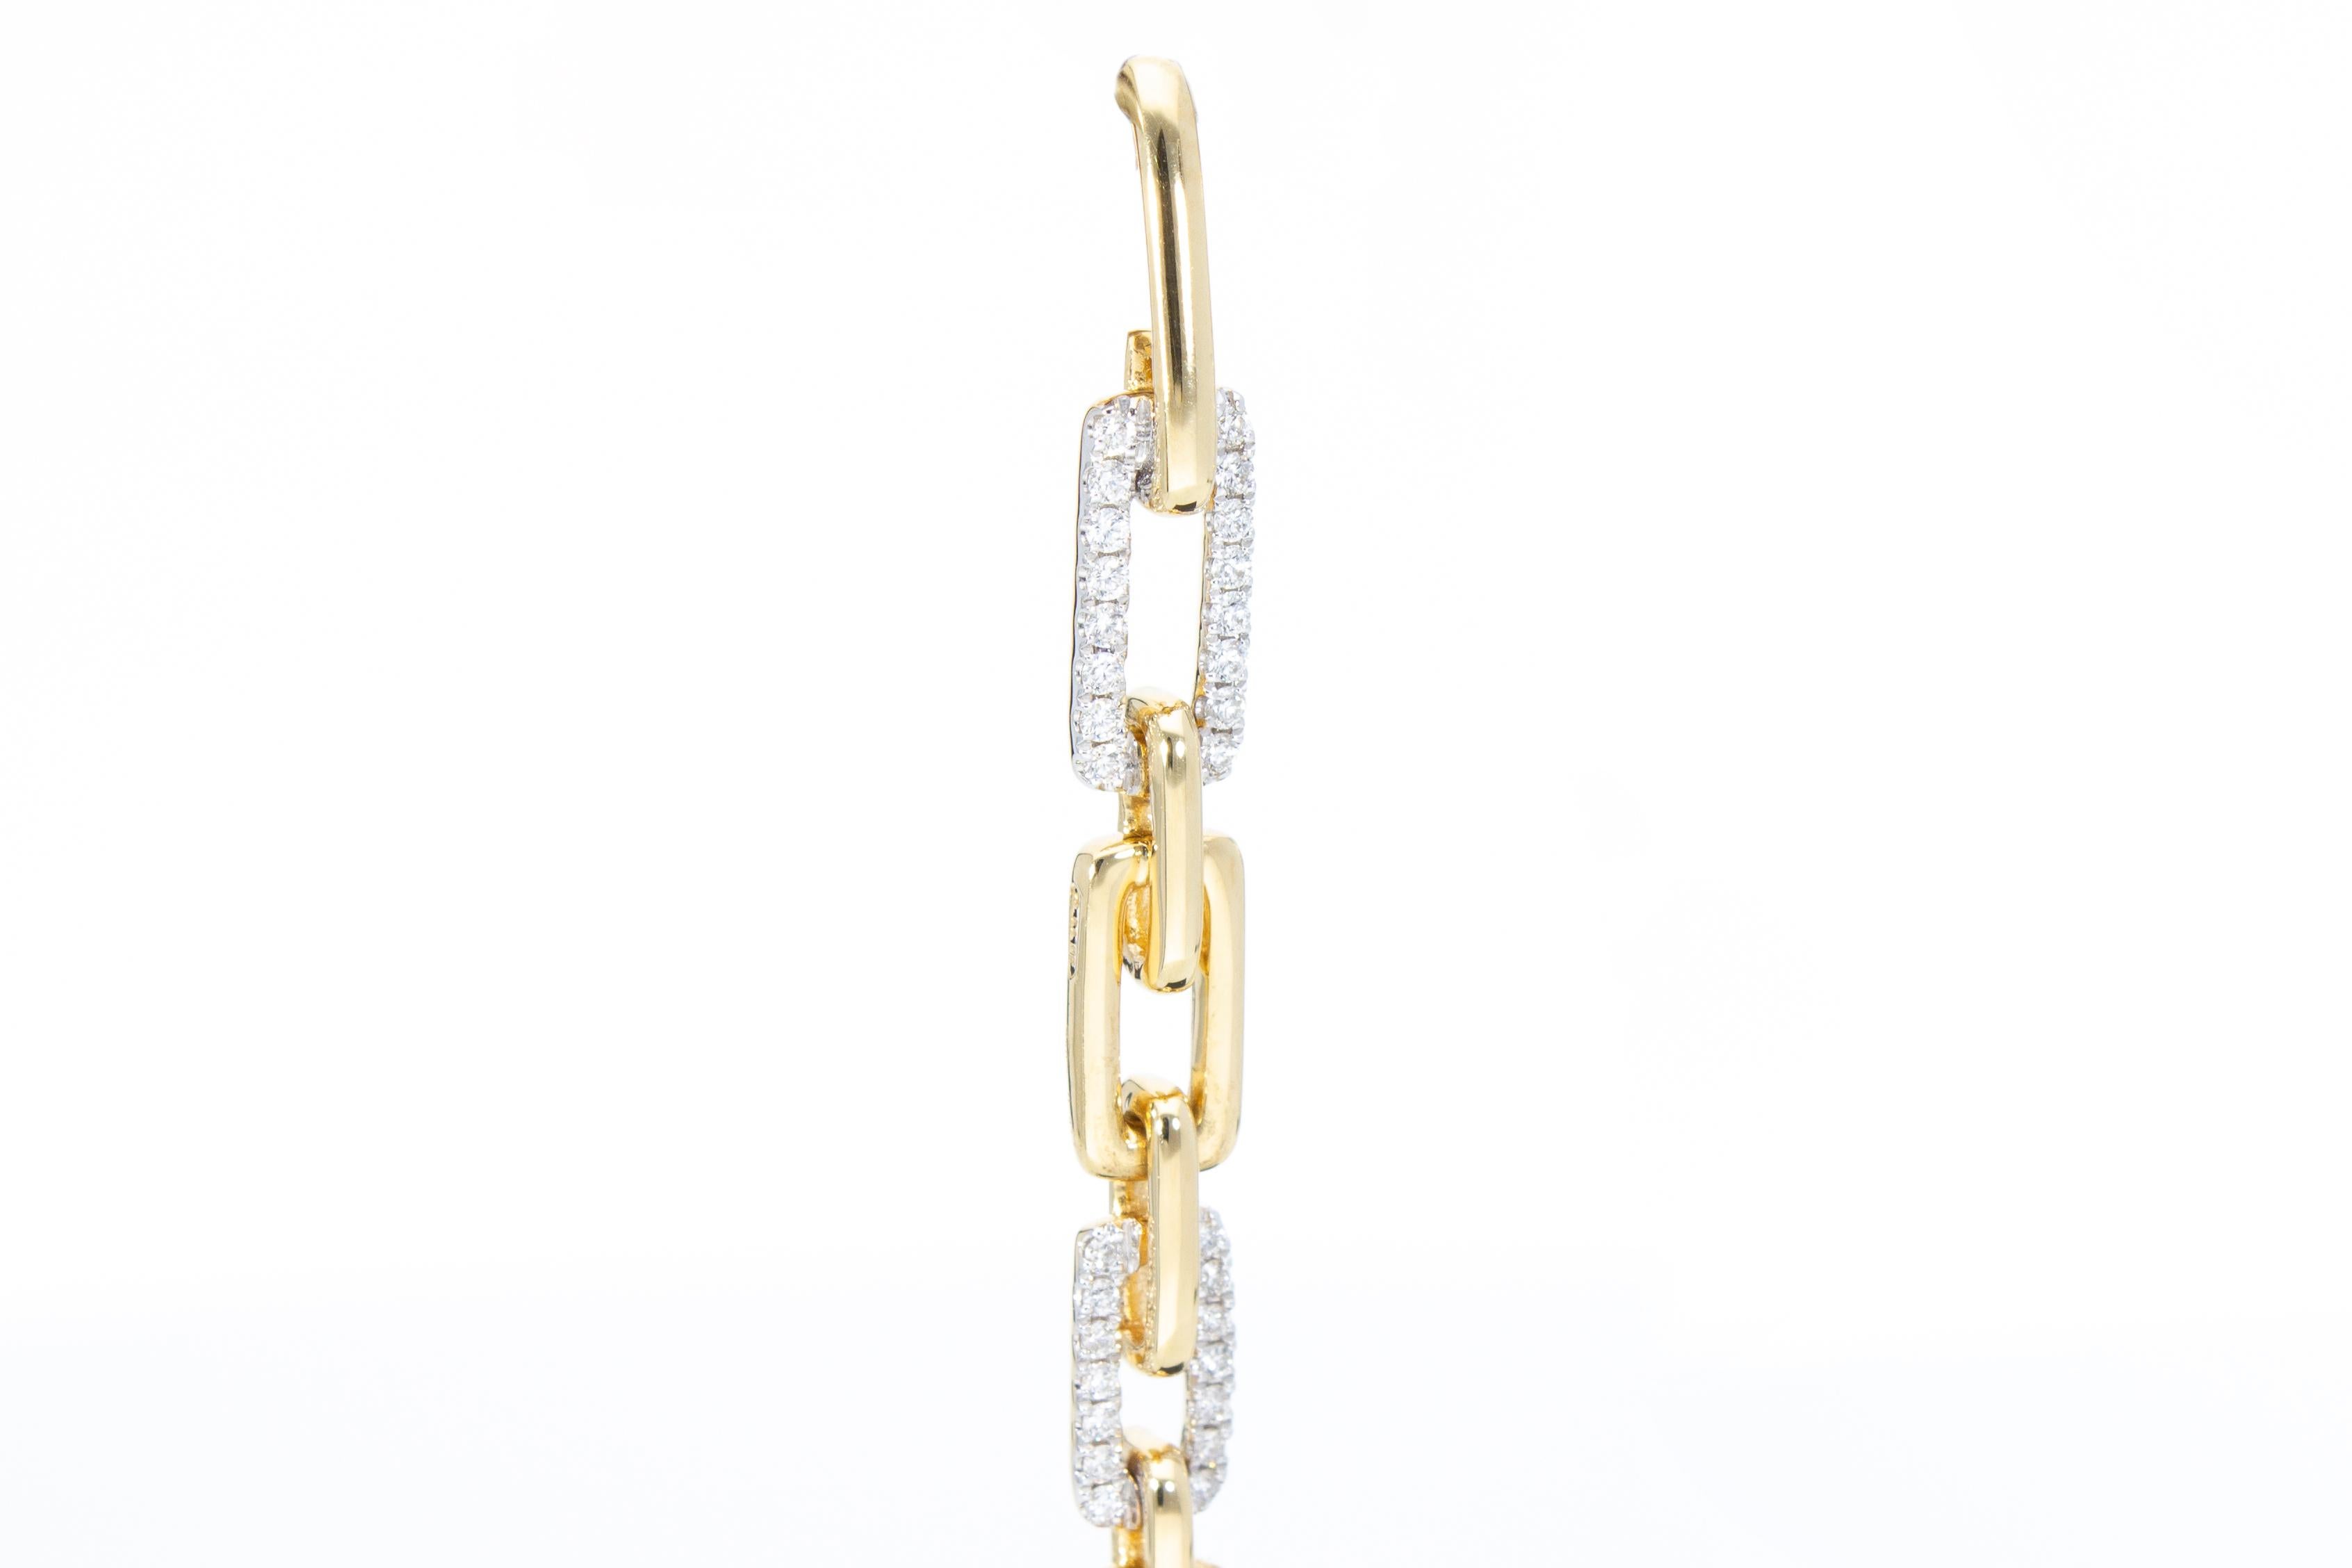 Women's Diamonds Ct 0.35 Pendant Earrings with Rectangular Links 18k Gold Made in Italy For Sale